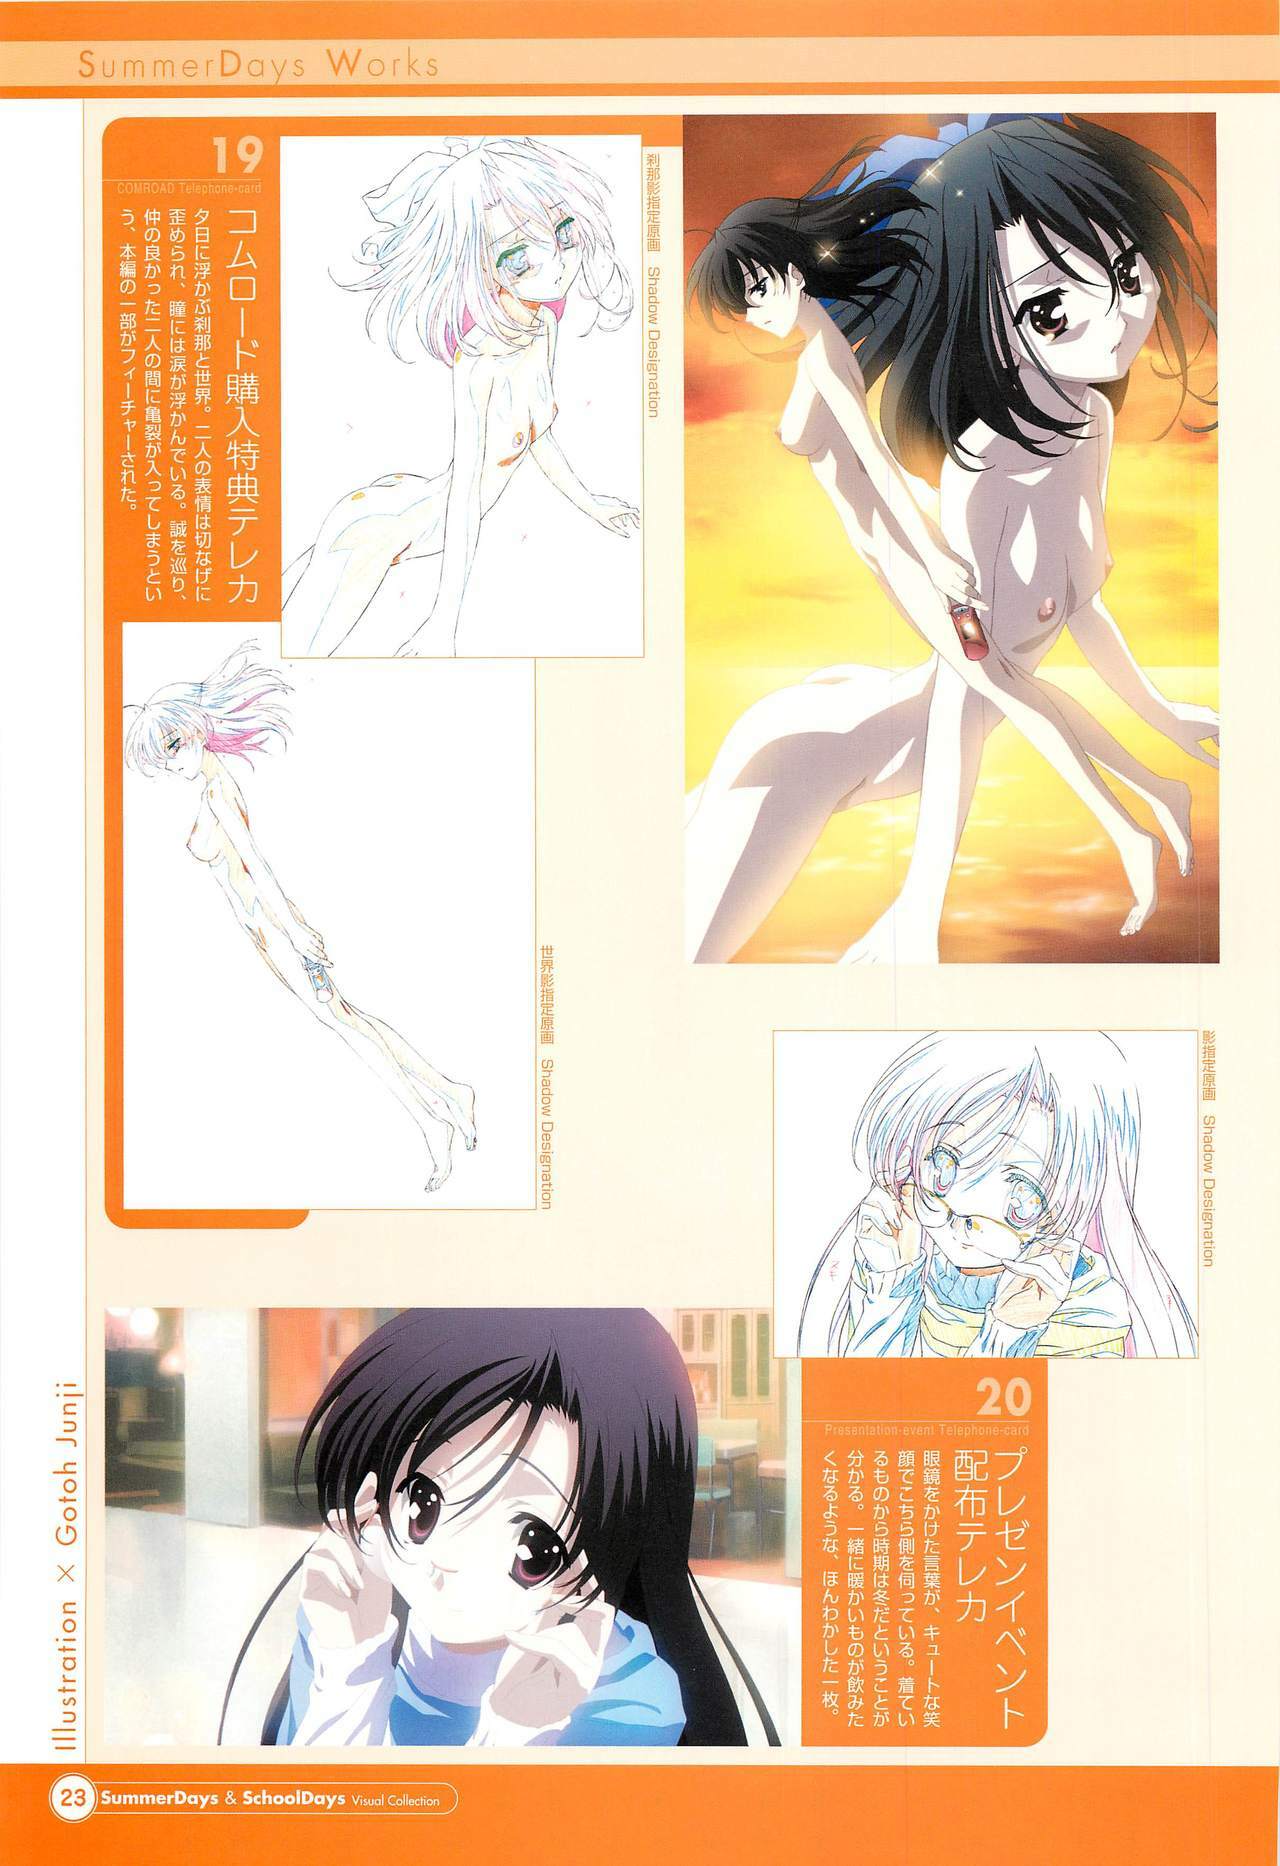 SummerDays & School Days Visual Collection page 25 full